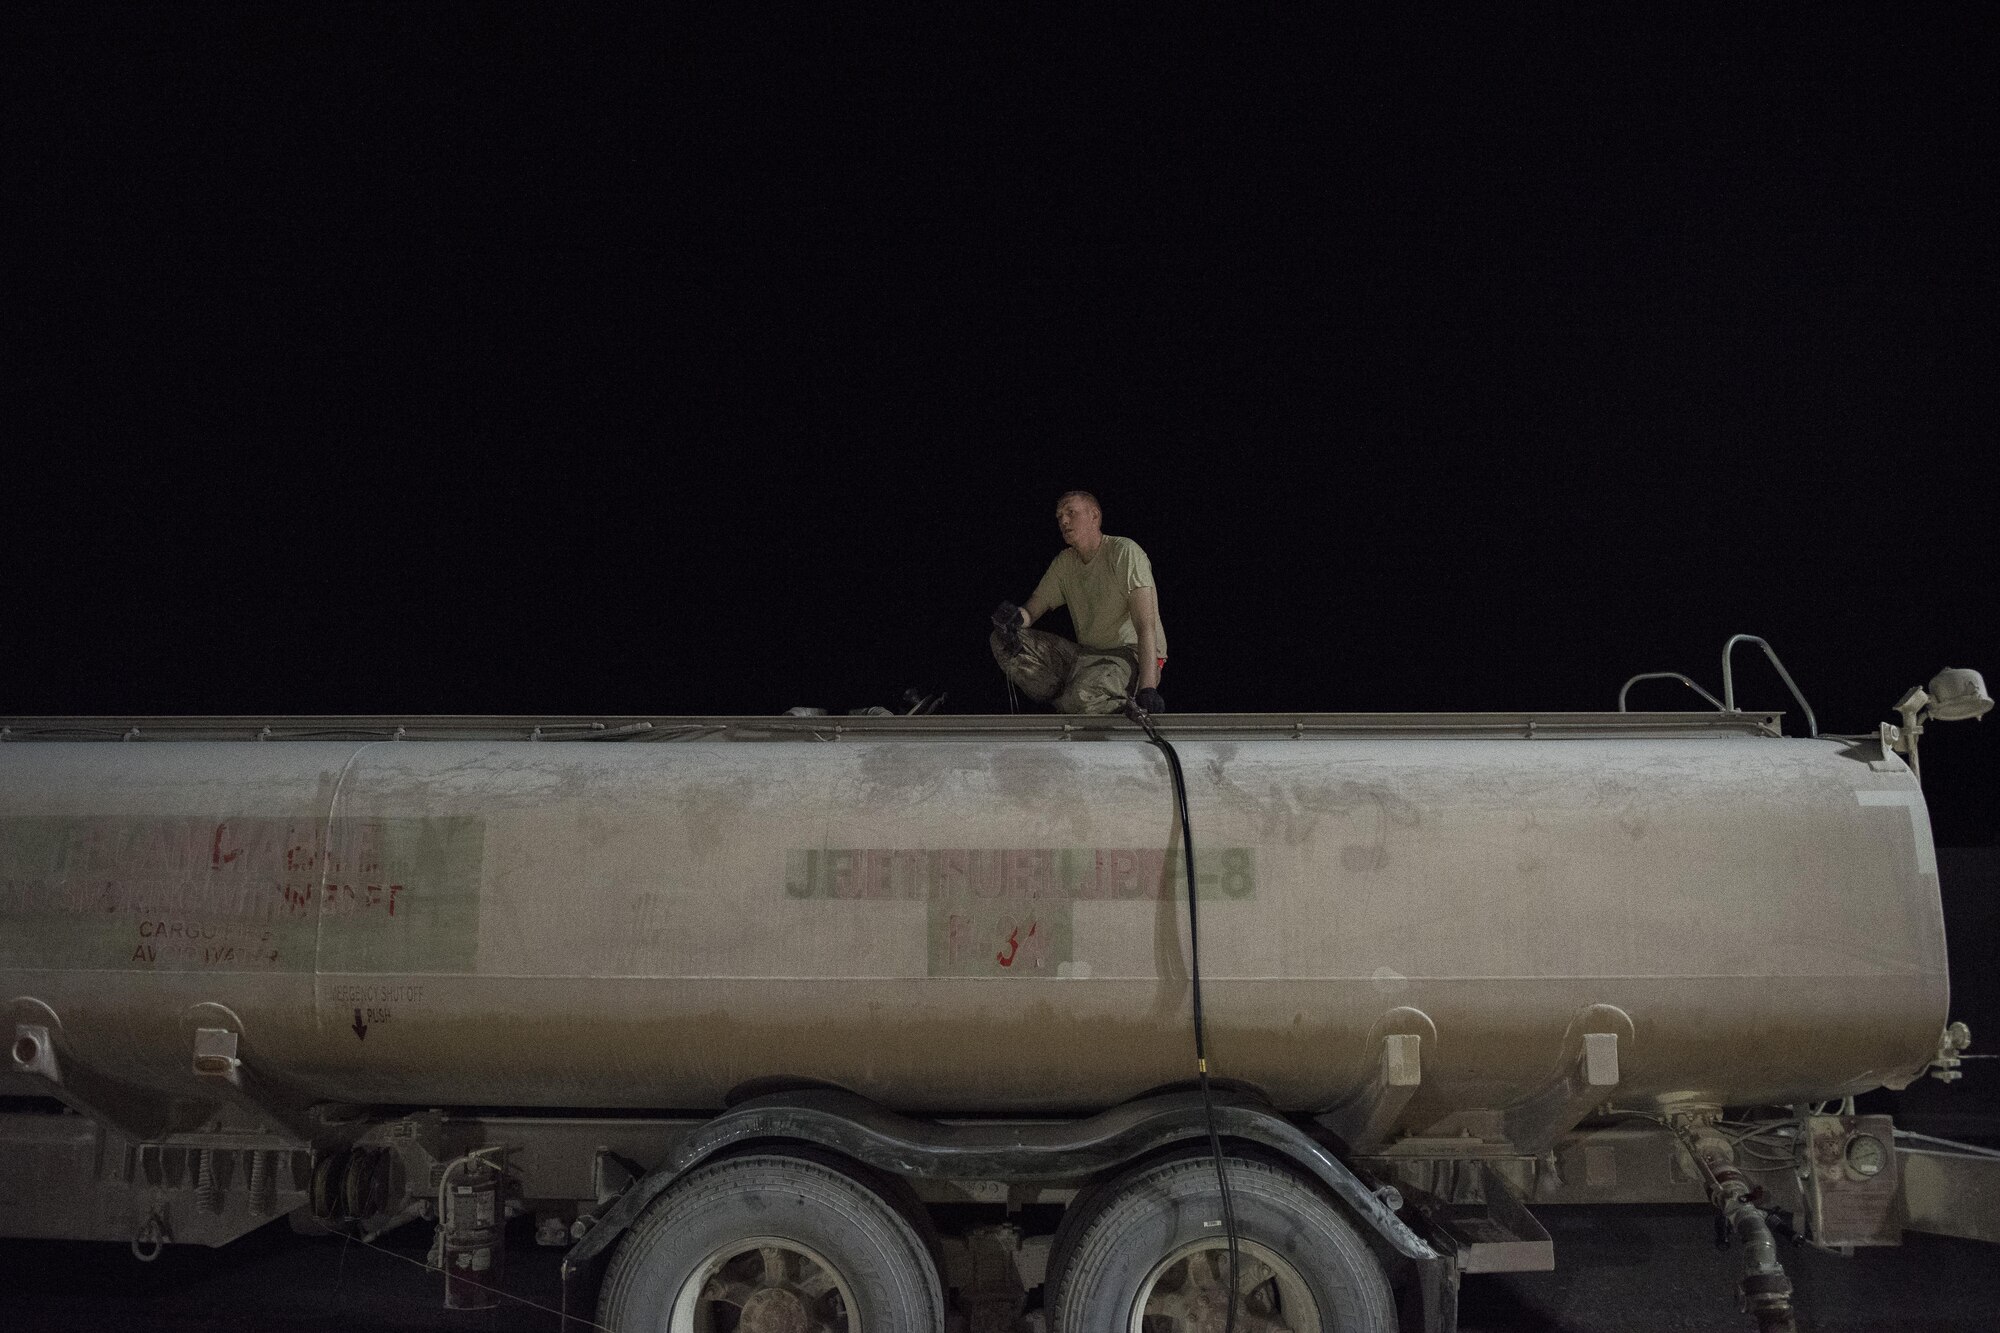 Staff Sgt. Kenneth Zaun, 332nd Expeditionary Logistics Readiness Squadron fuels flight controller, refills a fuel truck July 22, 2017 in Southwest Asia. The 332nd ELRS manages the fuel supply for aircraft, vehicles and generators throughout the installation. (U.S. Air Force photo/Senior Airman Damon Kasberg)